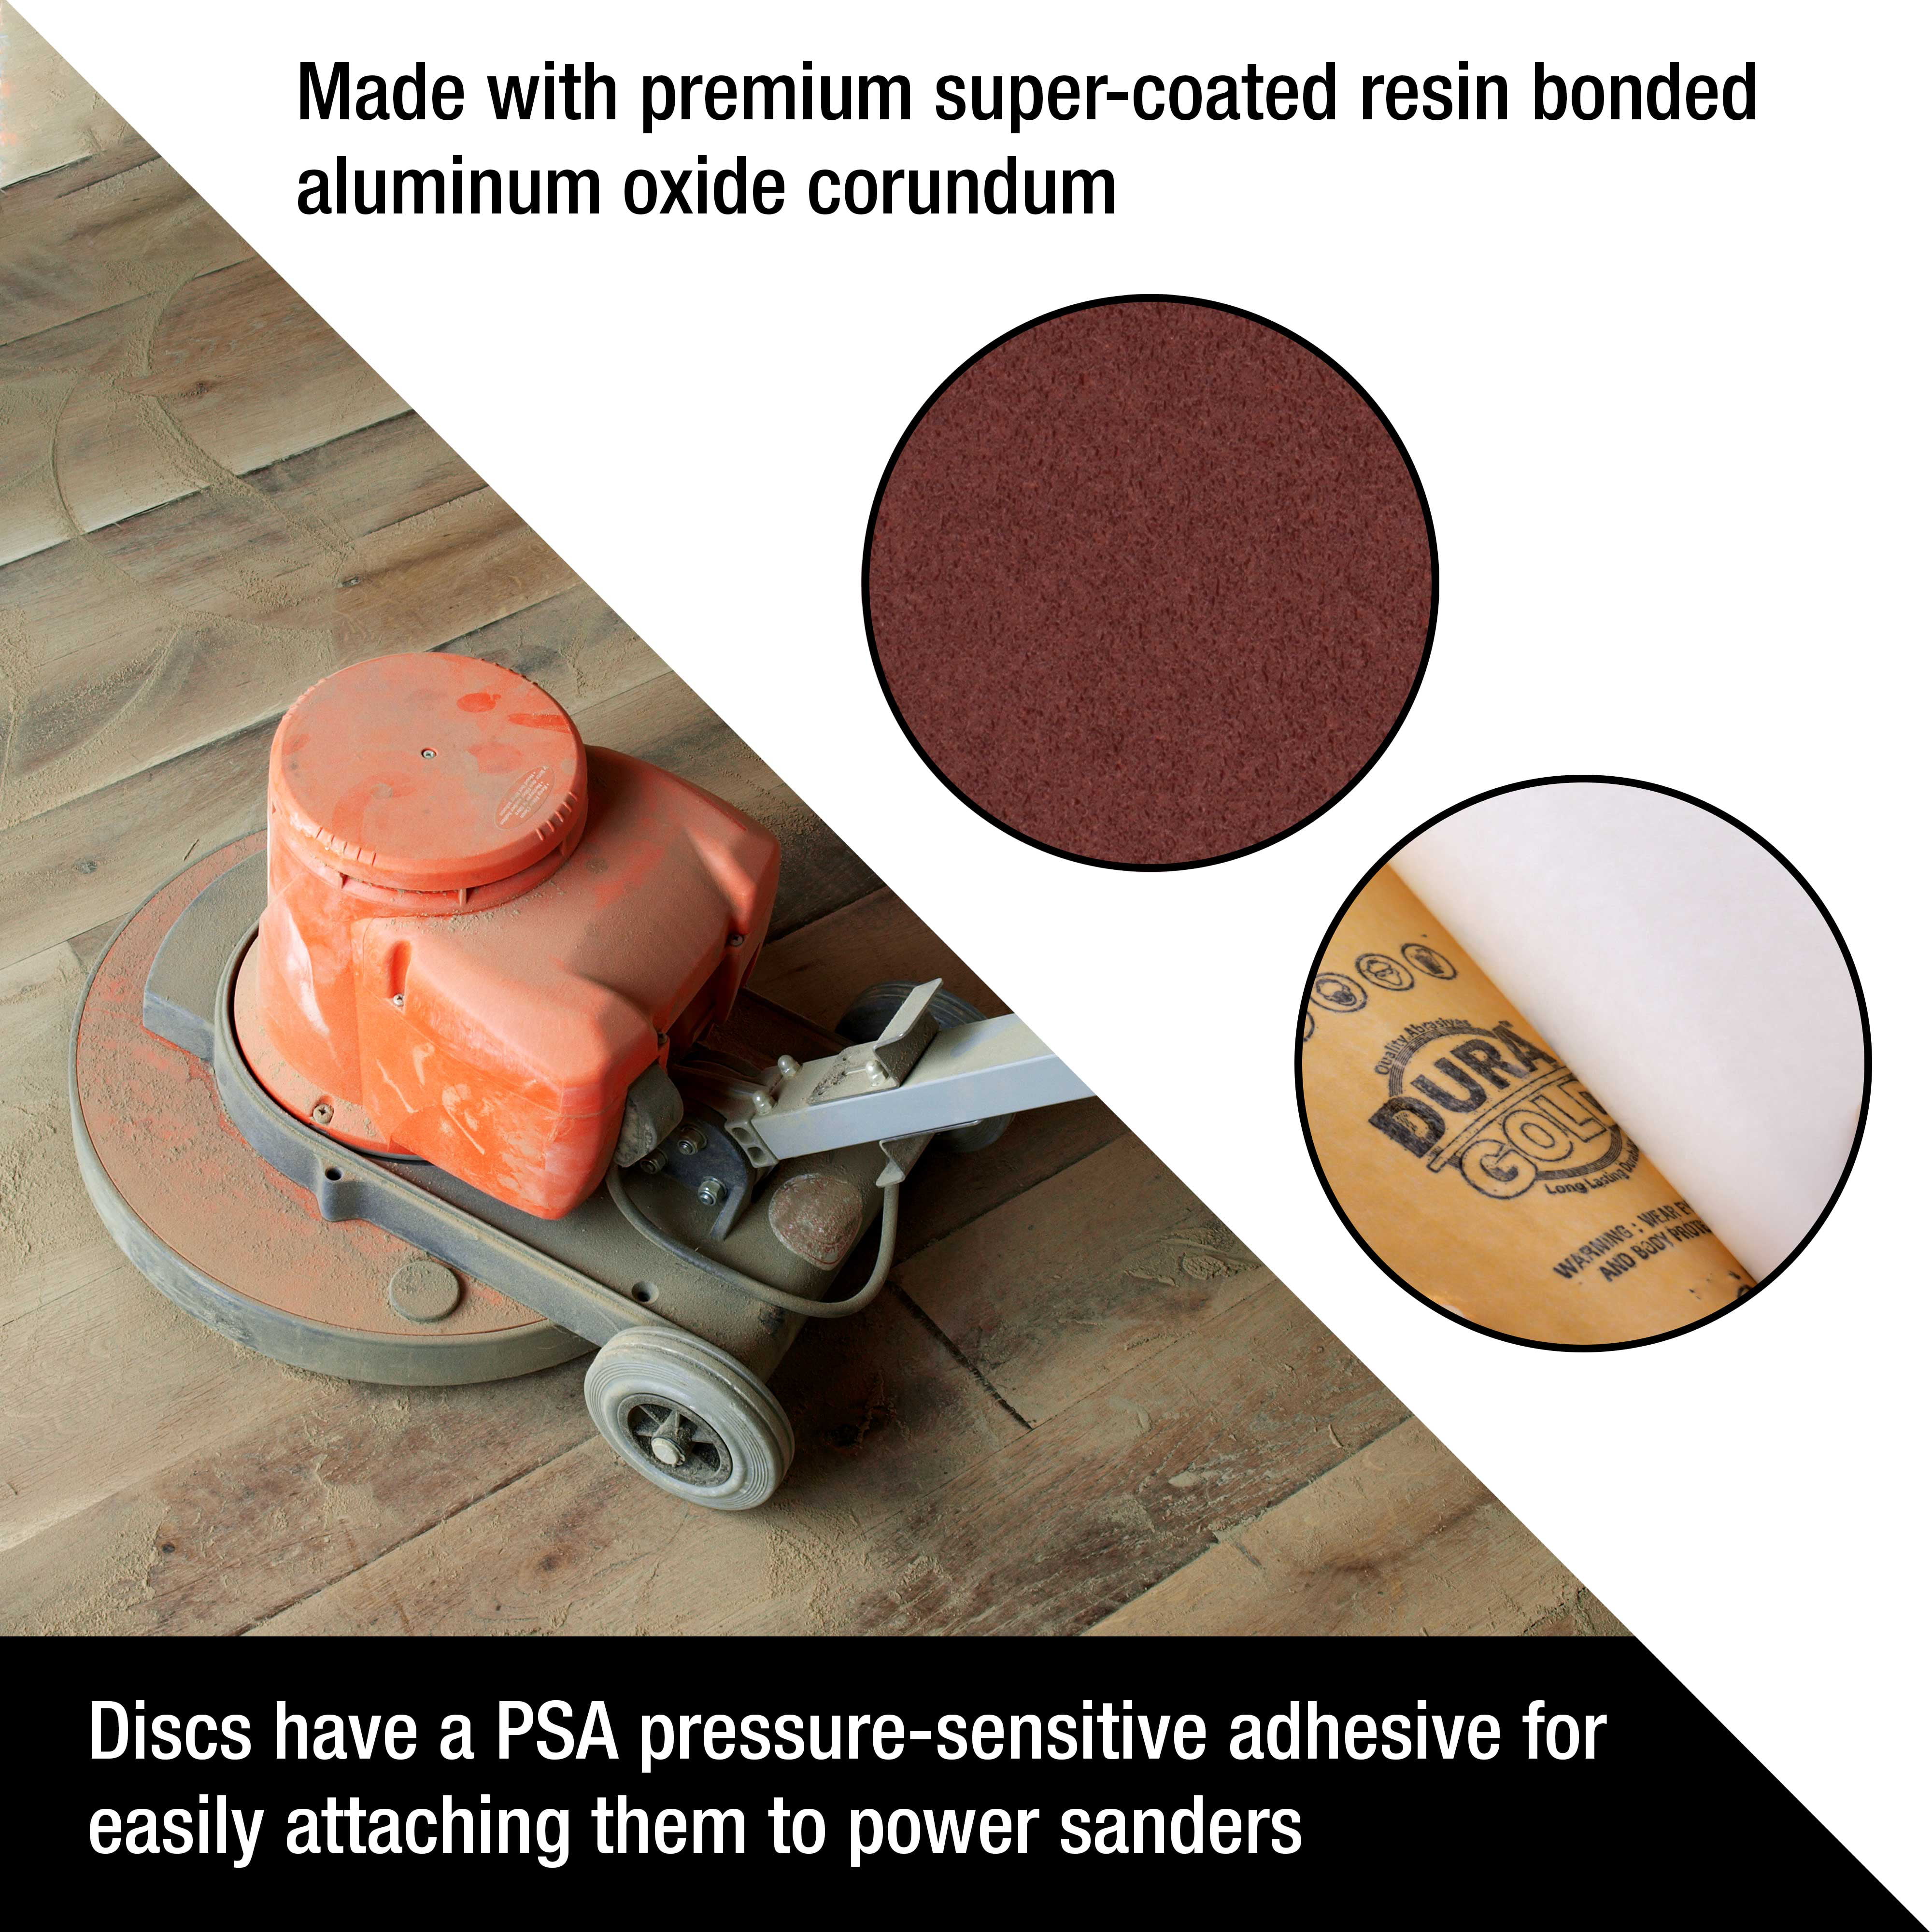 Fast Cutting Aluminum Oxide Abrasive - Sandpaper Discs with PSA Self Adhesive Stickyback Floor Box of 8 180 Grit Woodworking Sander Automotive Drywall Dura-Gold Premium 10 Sanding Discs 